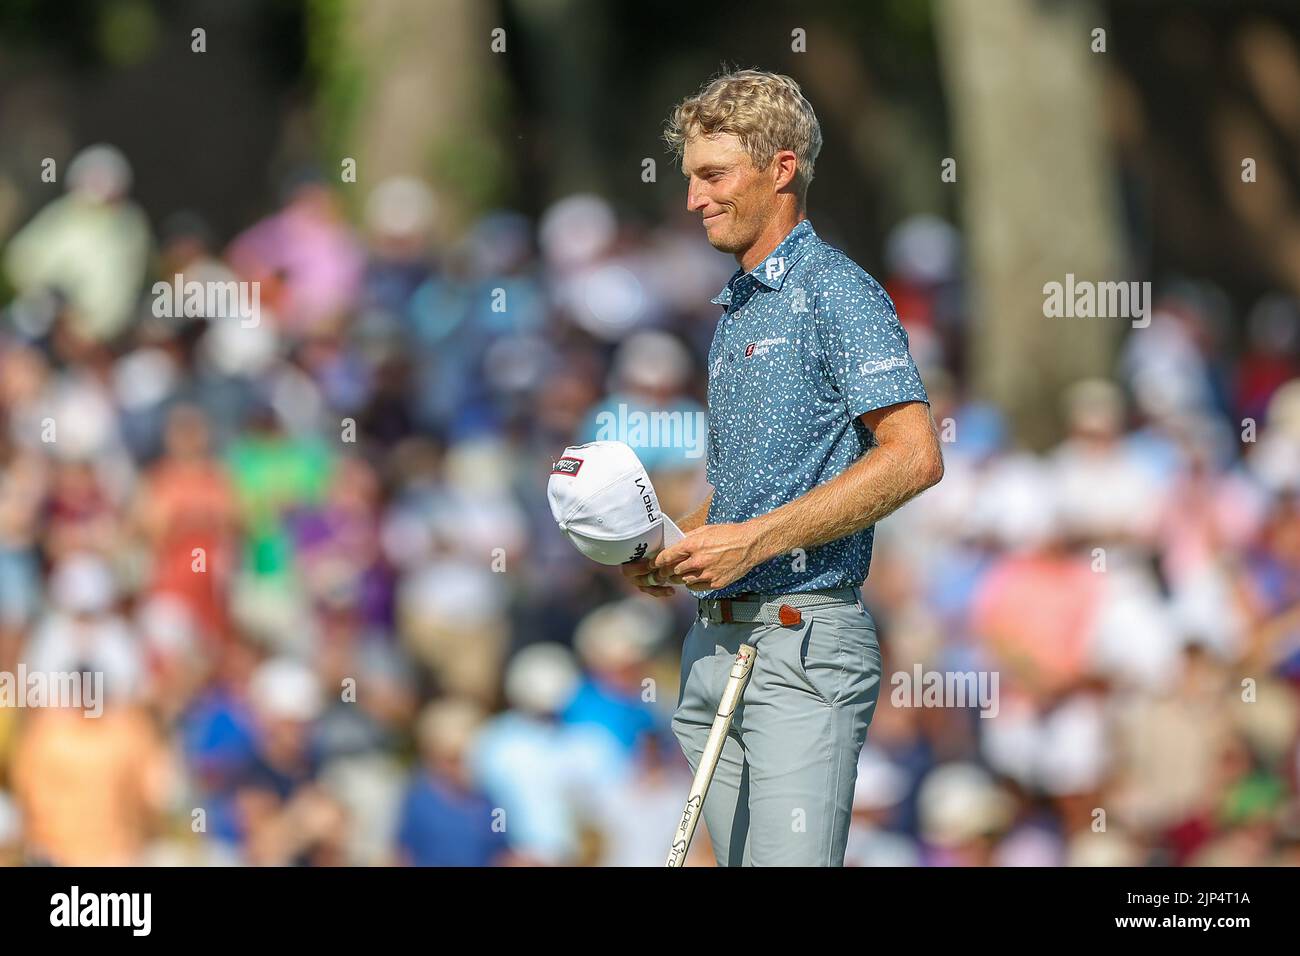 August 14, 2022: Will Zalatoris on the 18th green of his final round of the FedEx St. Jude Championship golf tournament at TPC Southwind in Memphis, TN. Gray Siegel/Cal Sport Media Stock Photo